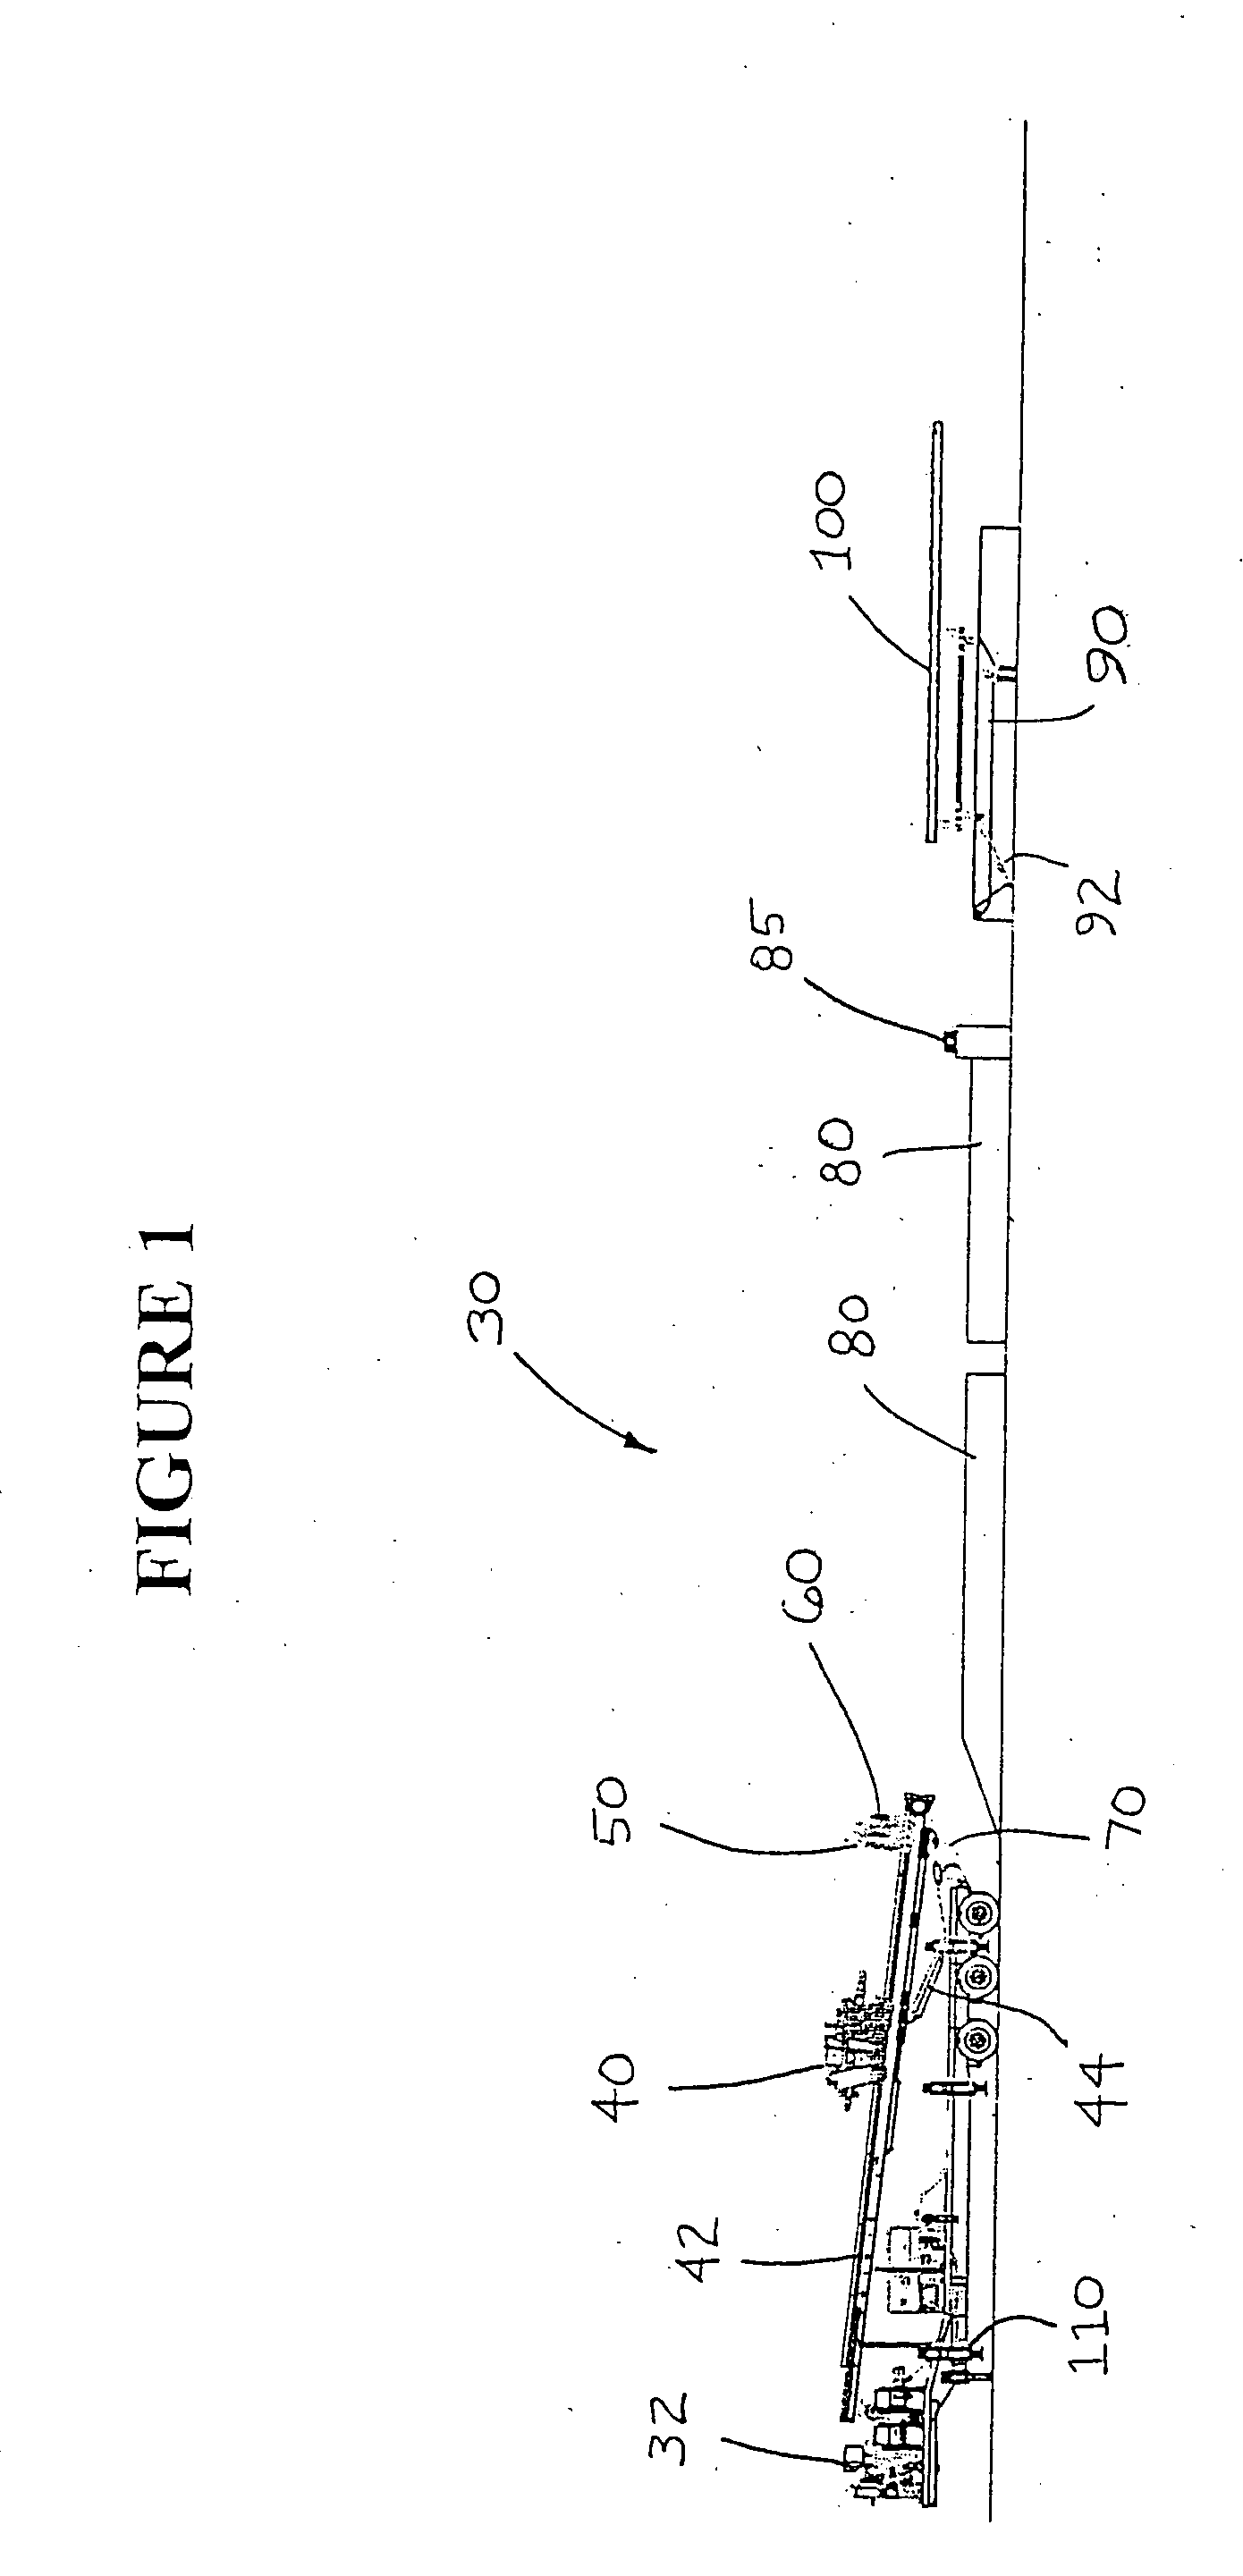 Apparatus and method for modified horizontal directional drilling assembly